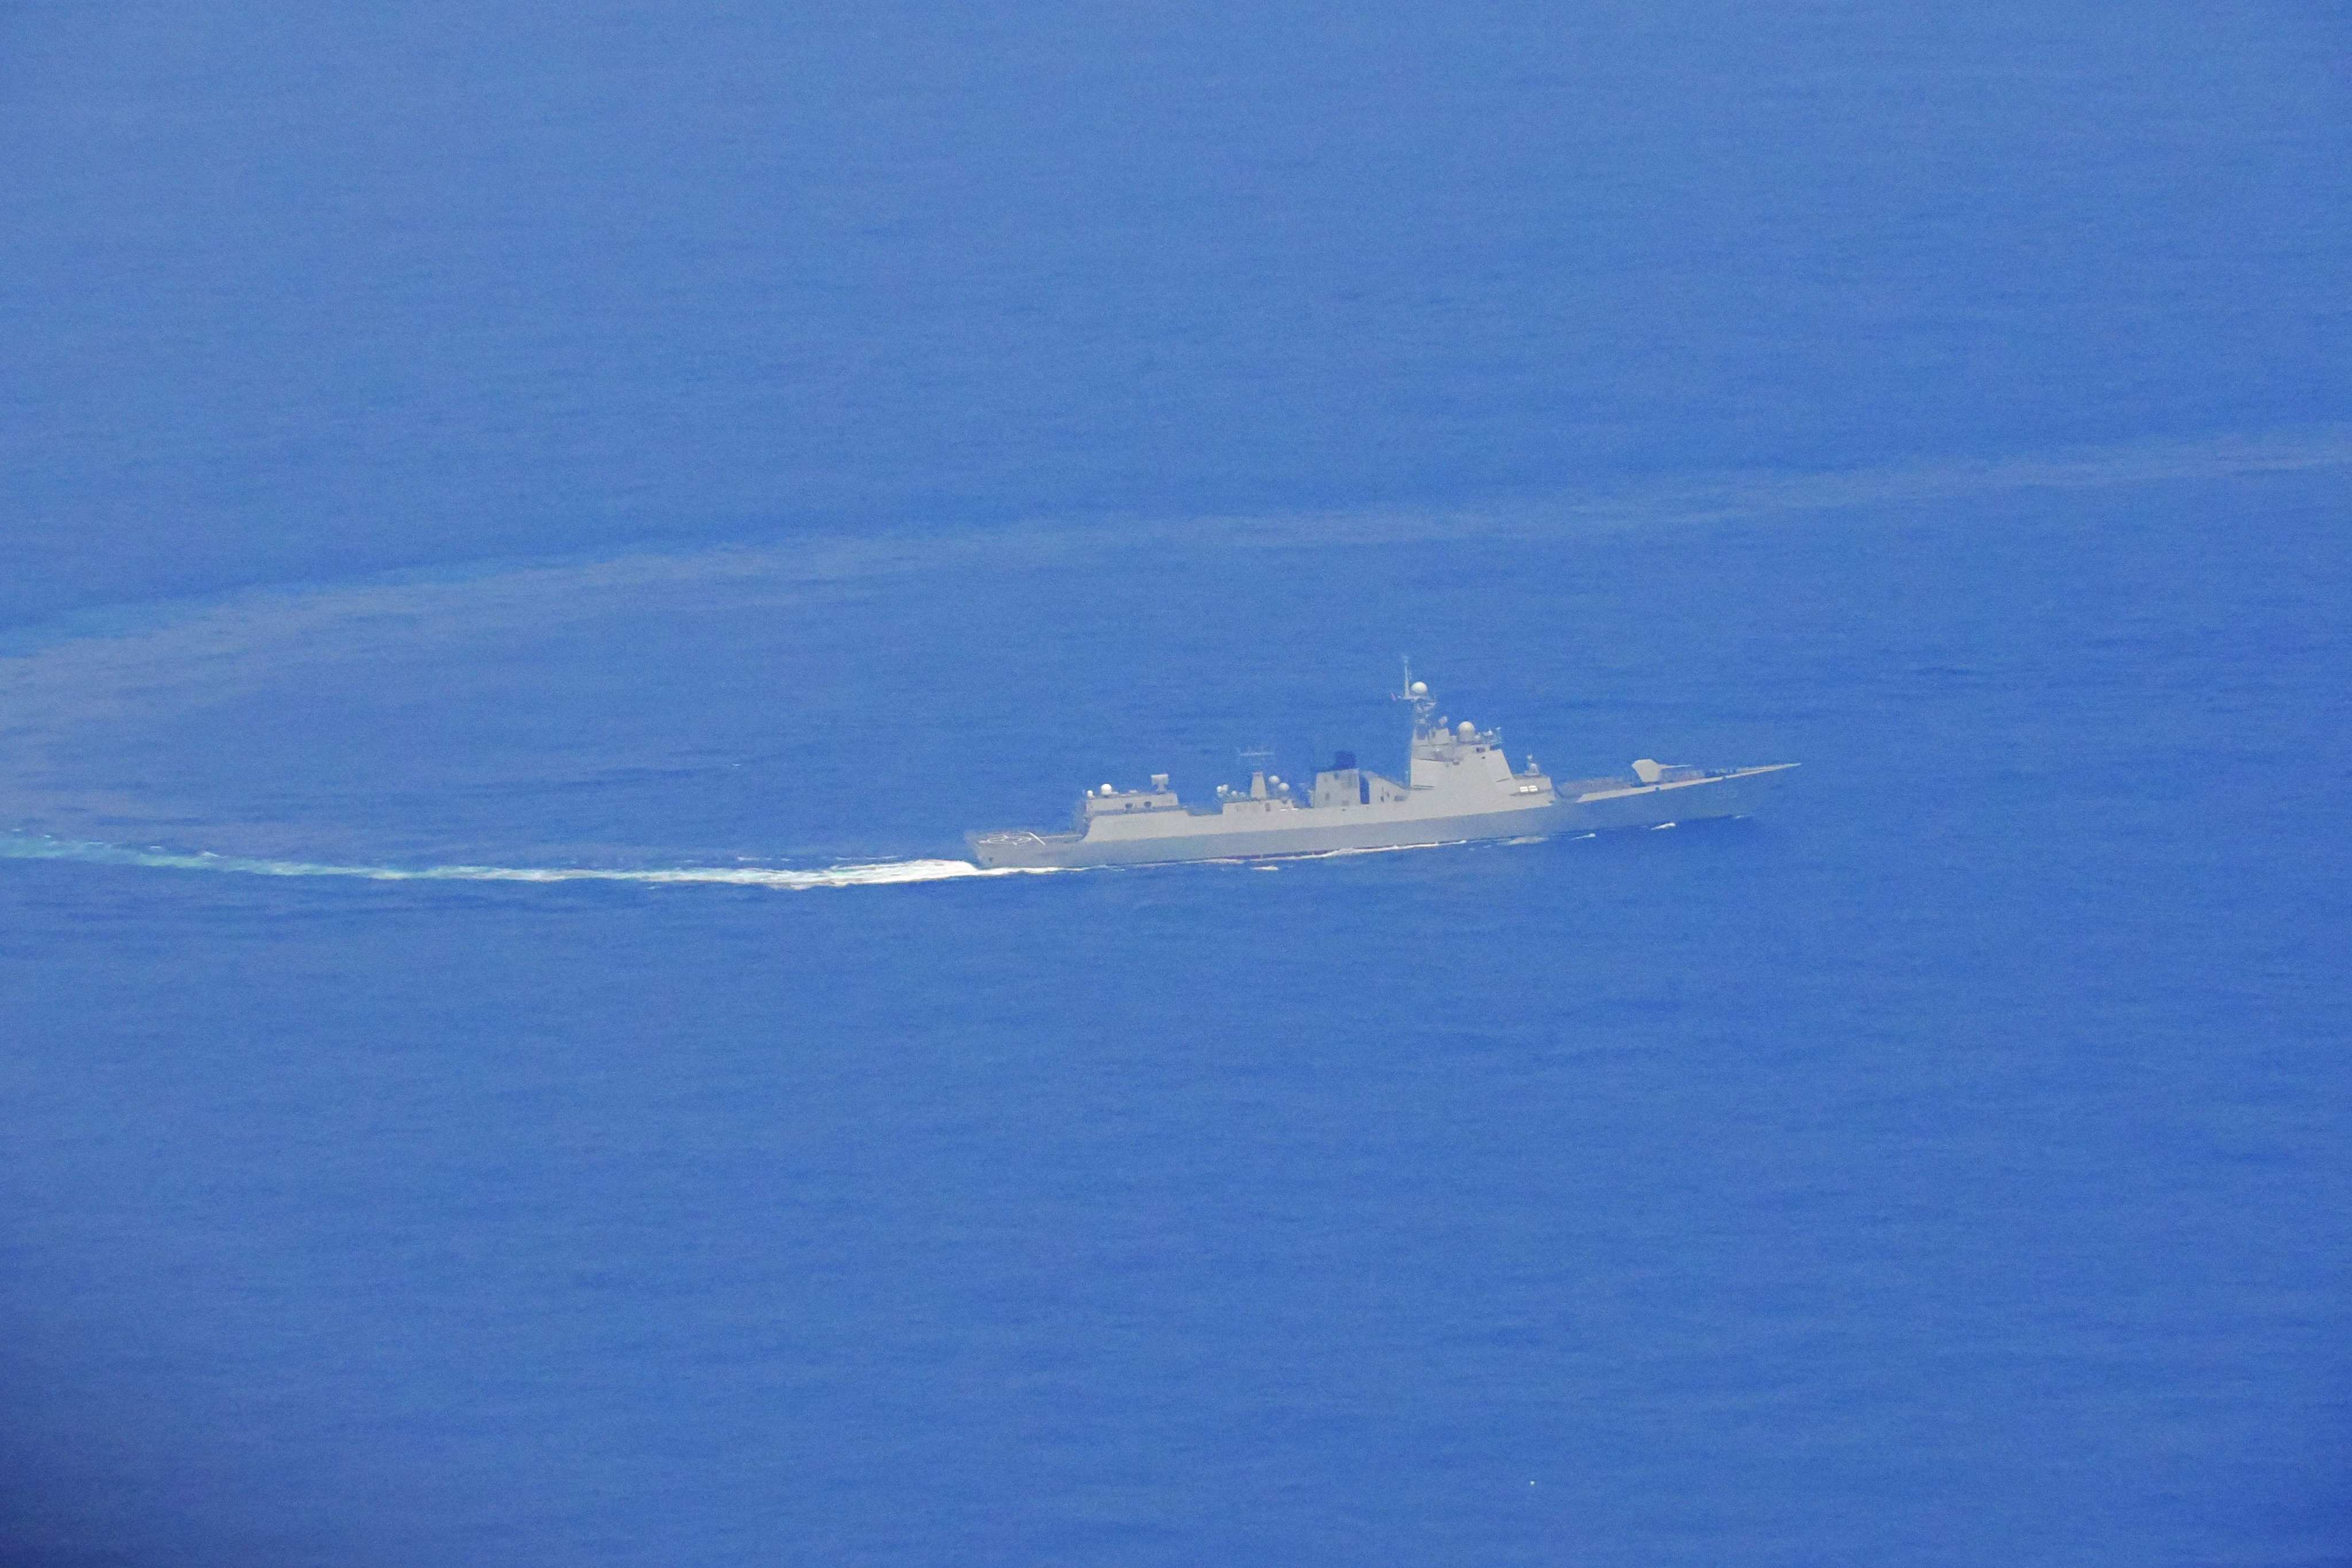 An image released on Friday by the Taiwanese defence ministry shows a mainland Chinese military vessel sailing in an unknown location on the previous day, during PLA drills around the island. Photo: AFP